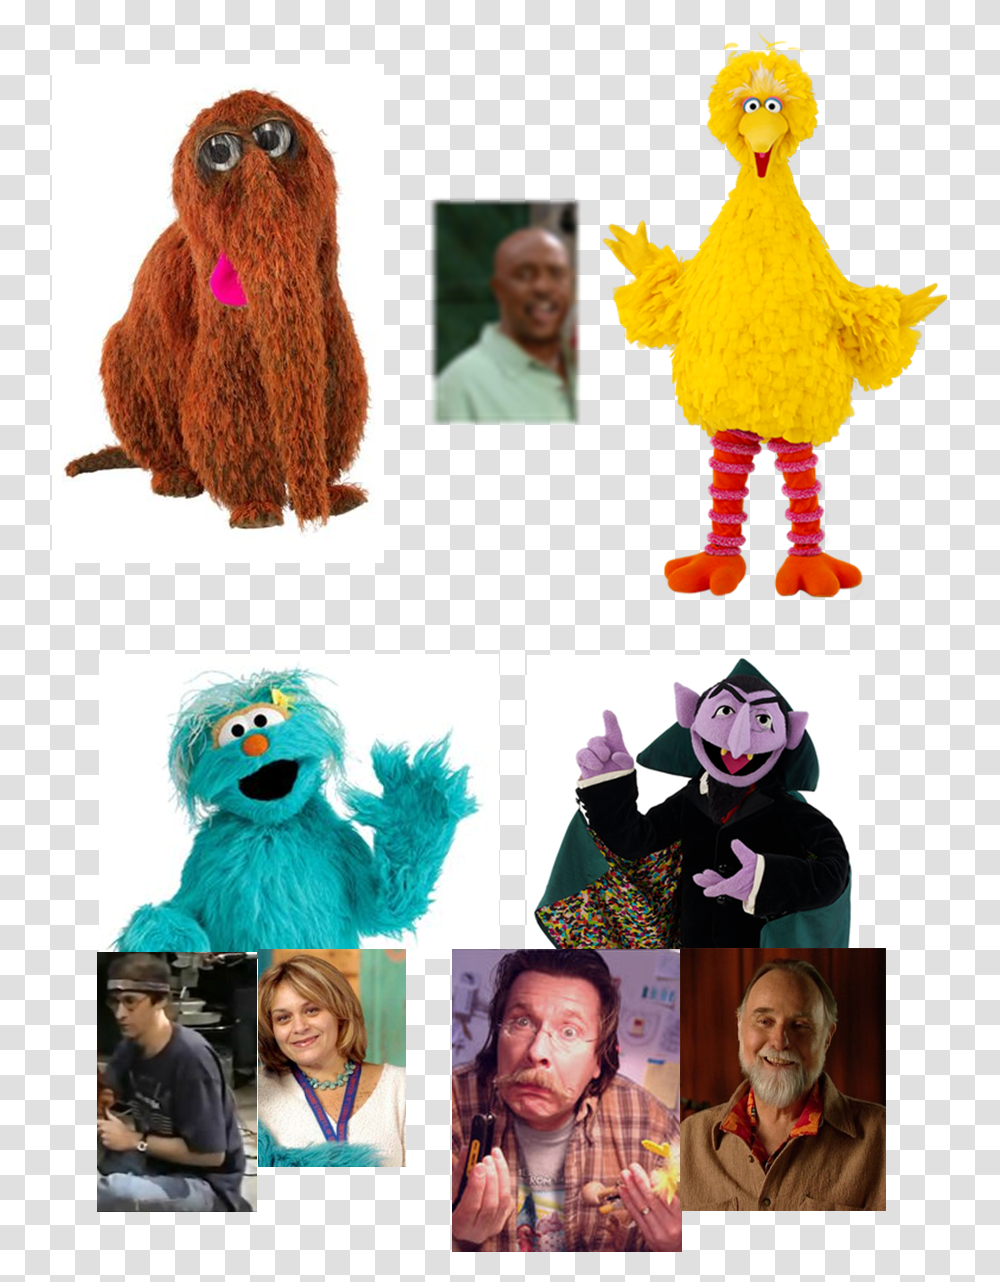 Muppet Wiki Scenes Sesame Street Sesame Street Episodes And Videos Muppet, Person, Costume, Collage Transparent Png